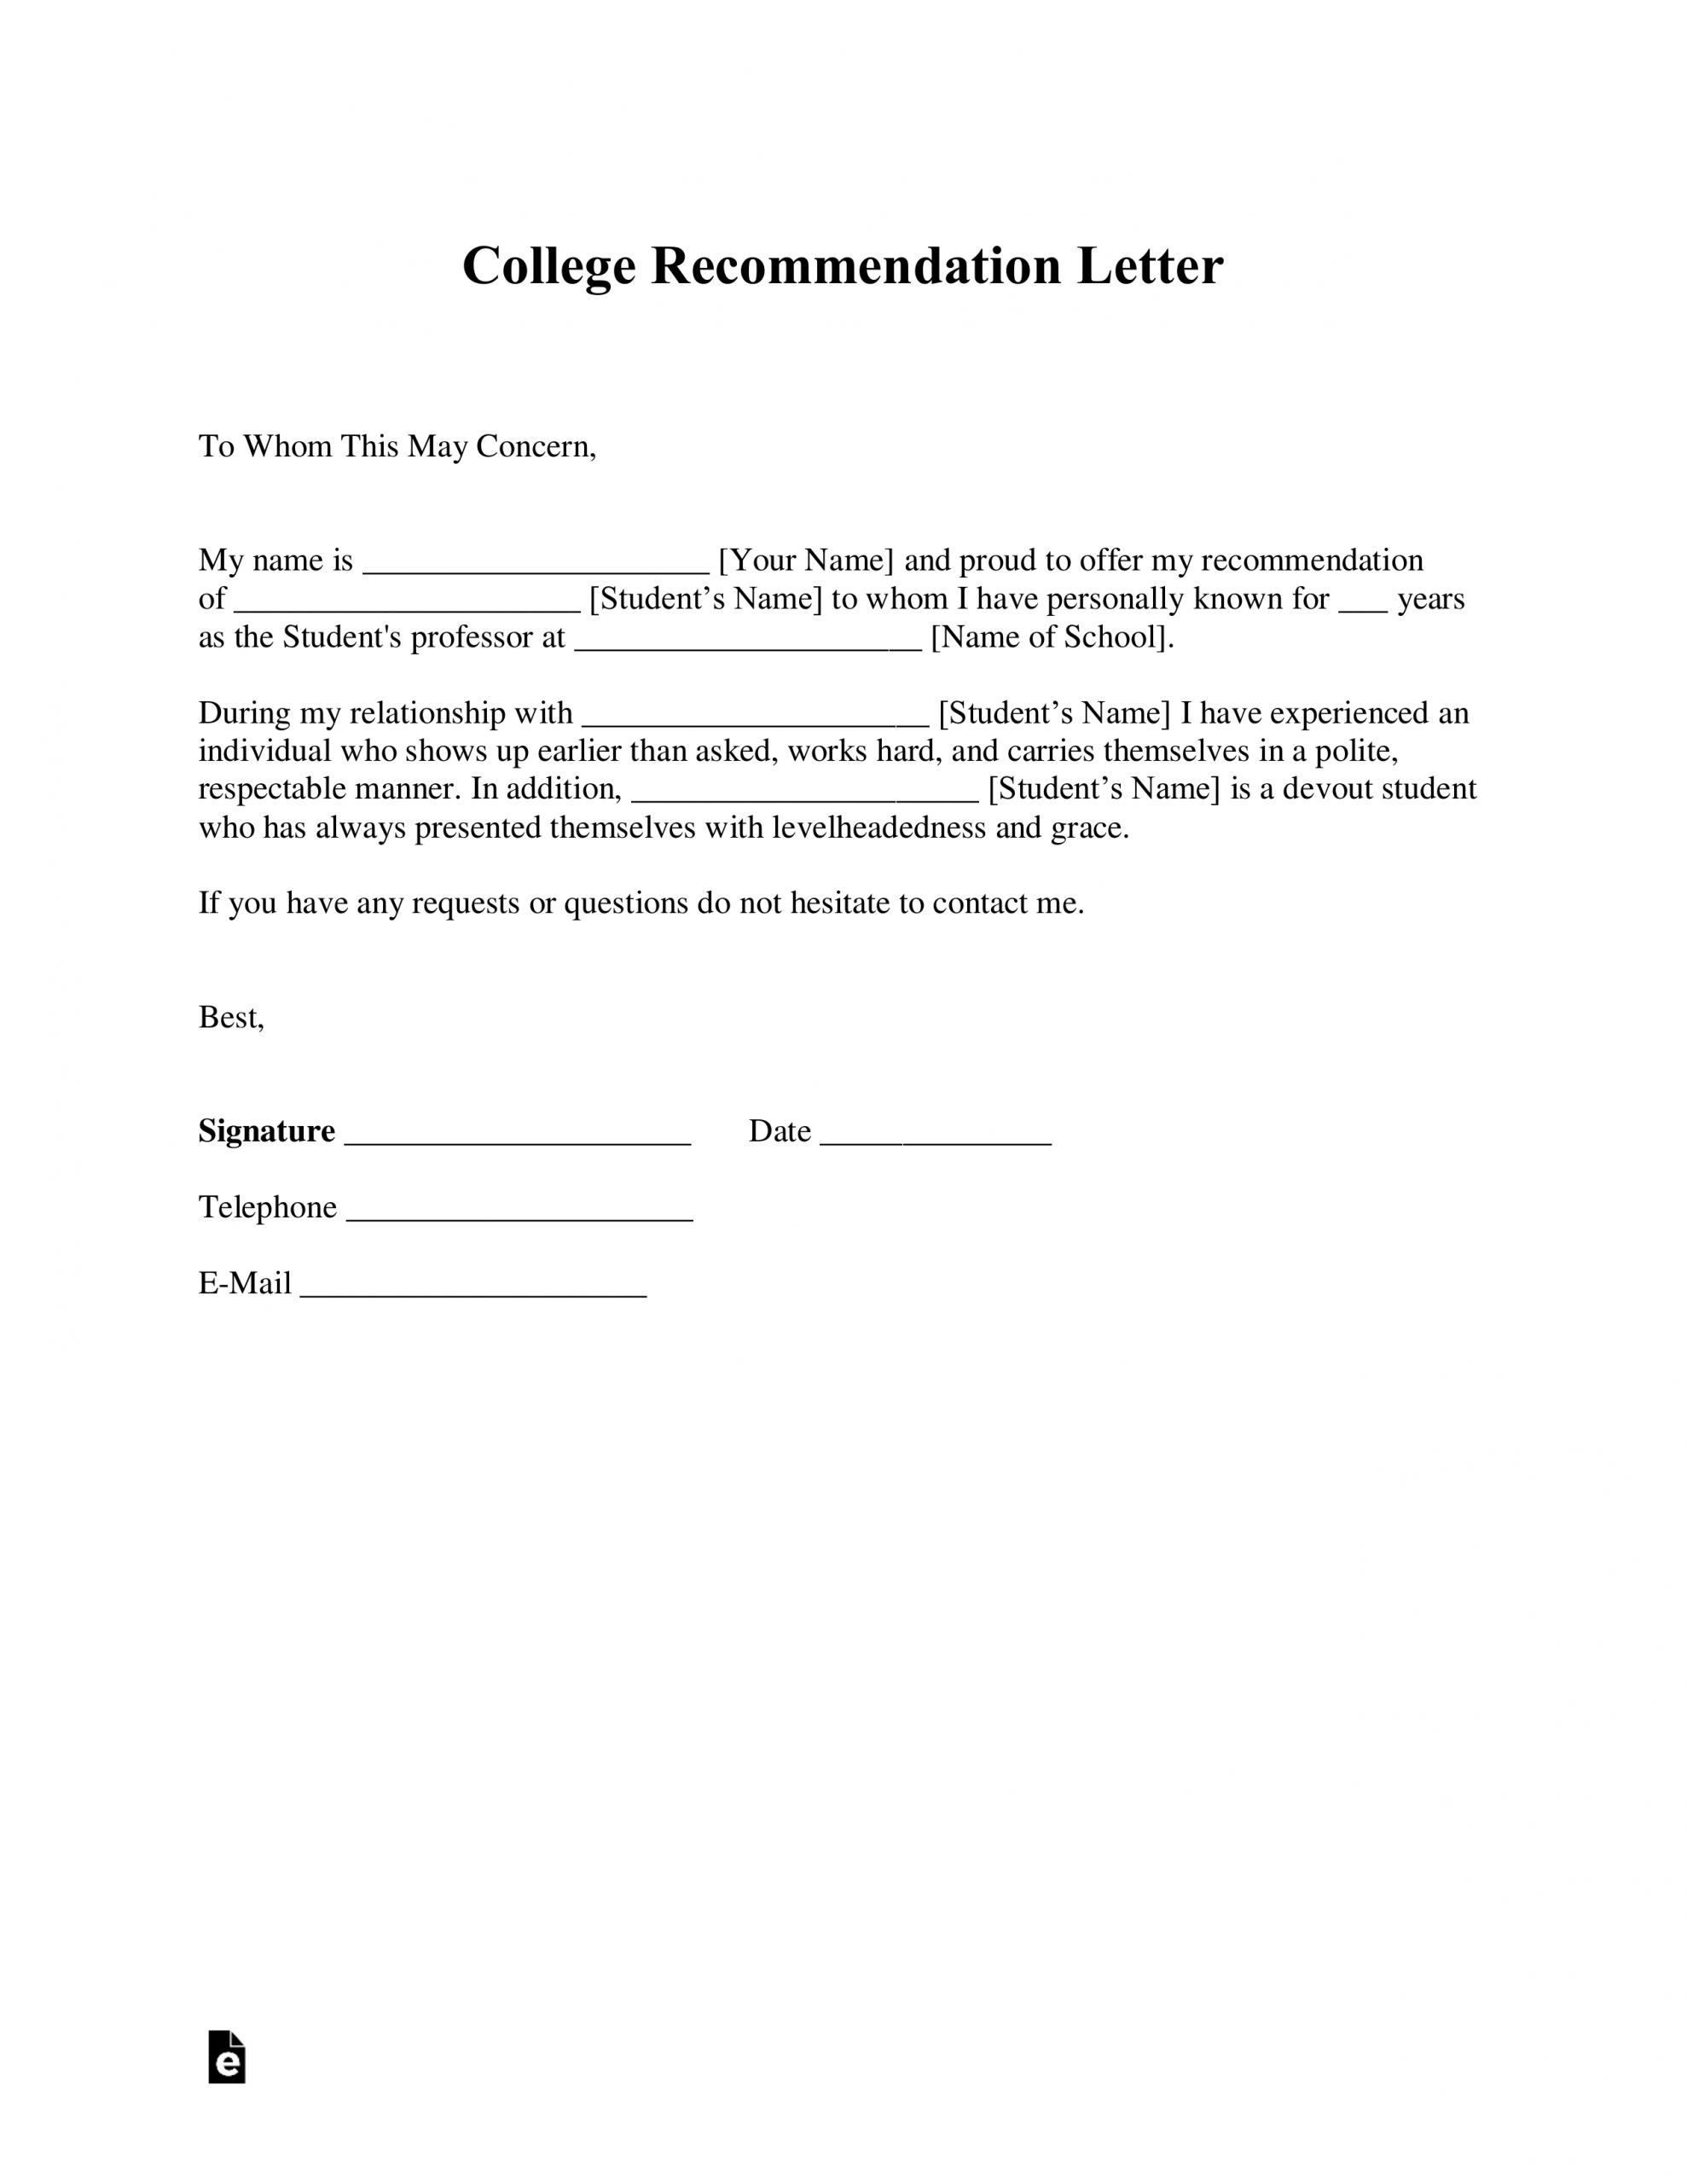 Recommendation Letter For College Debandje with regard to dimensions 2550 X 3301